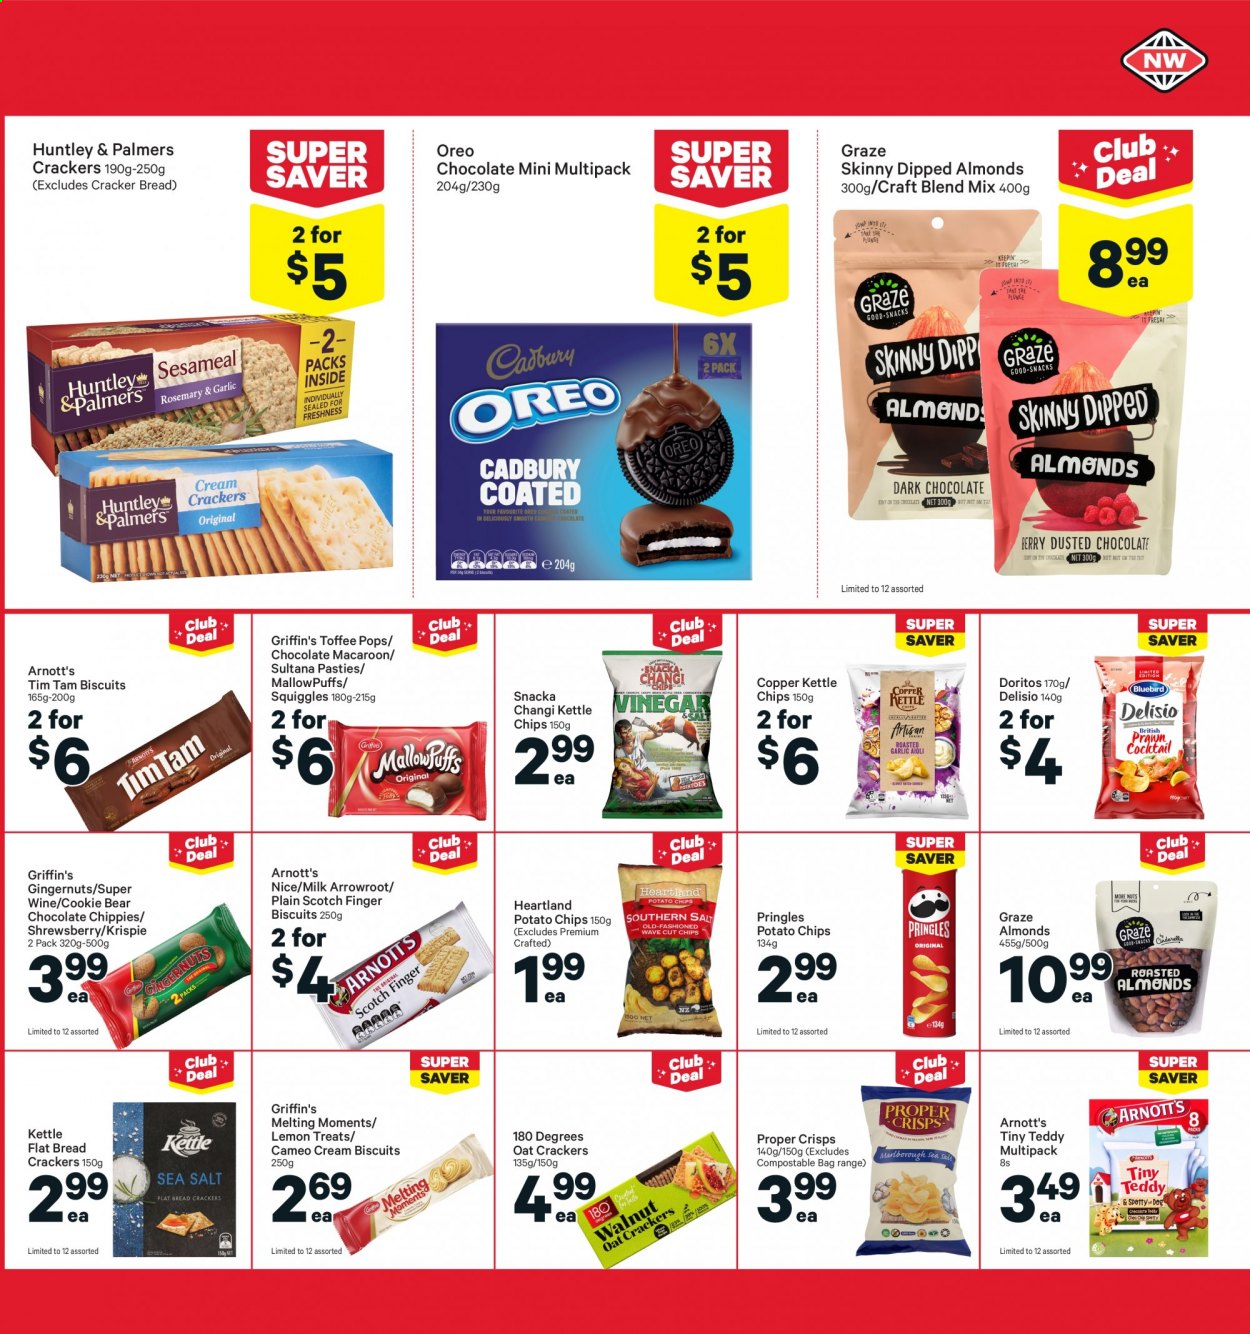 thumbnail - New World mailer - 09.08.2021 - 15.08.2021 - Sales products - bread, Oreo, milk, chocolate, toffee, crackers, Tim Tam, biscuit, MallowPuffs, Griffin's, Doritos, potato chips, Pringles, chips, Heartland, Delisio, Copper Kettle, oats, almonds, Graze, wine. Page 17.